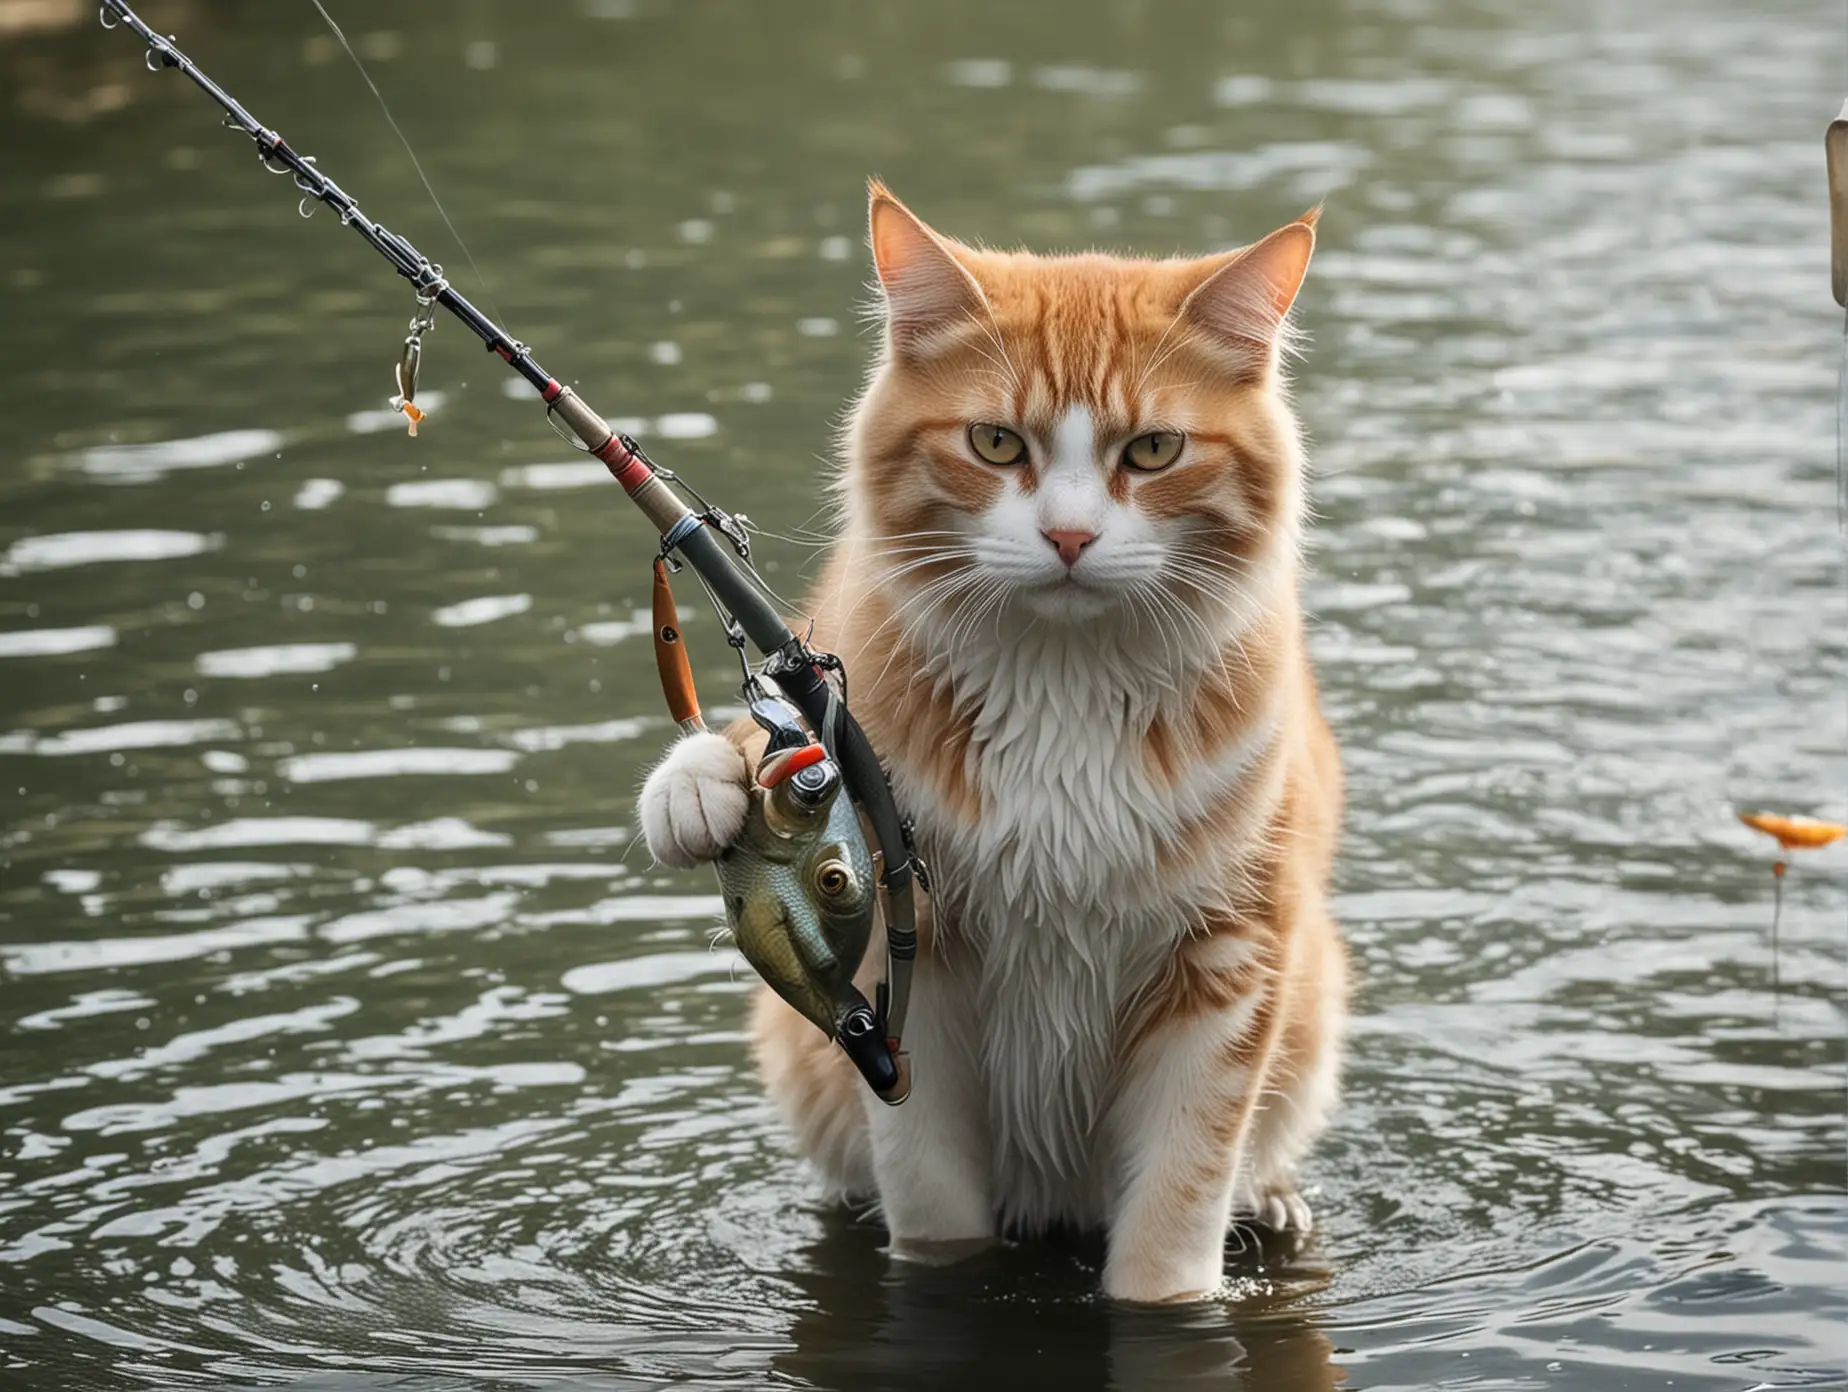 Playful Cat Fishing by the Lake